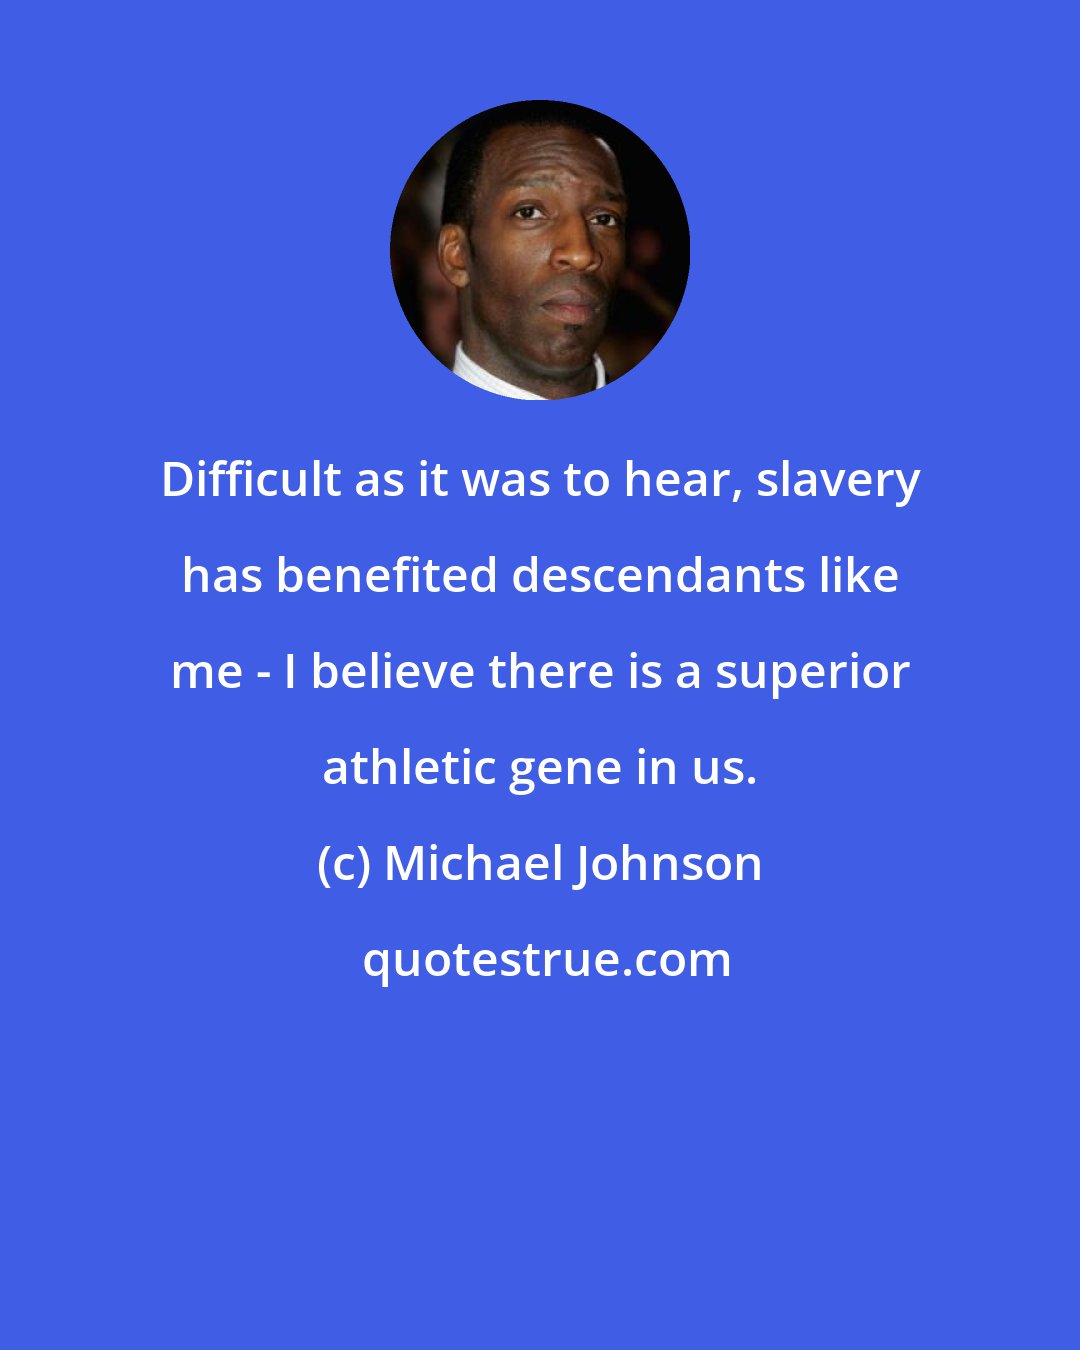 Michael Johnson: Difficult as it was to hear, slavery has benefited descendants like me - I believe there is a superior athletic gene in us.